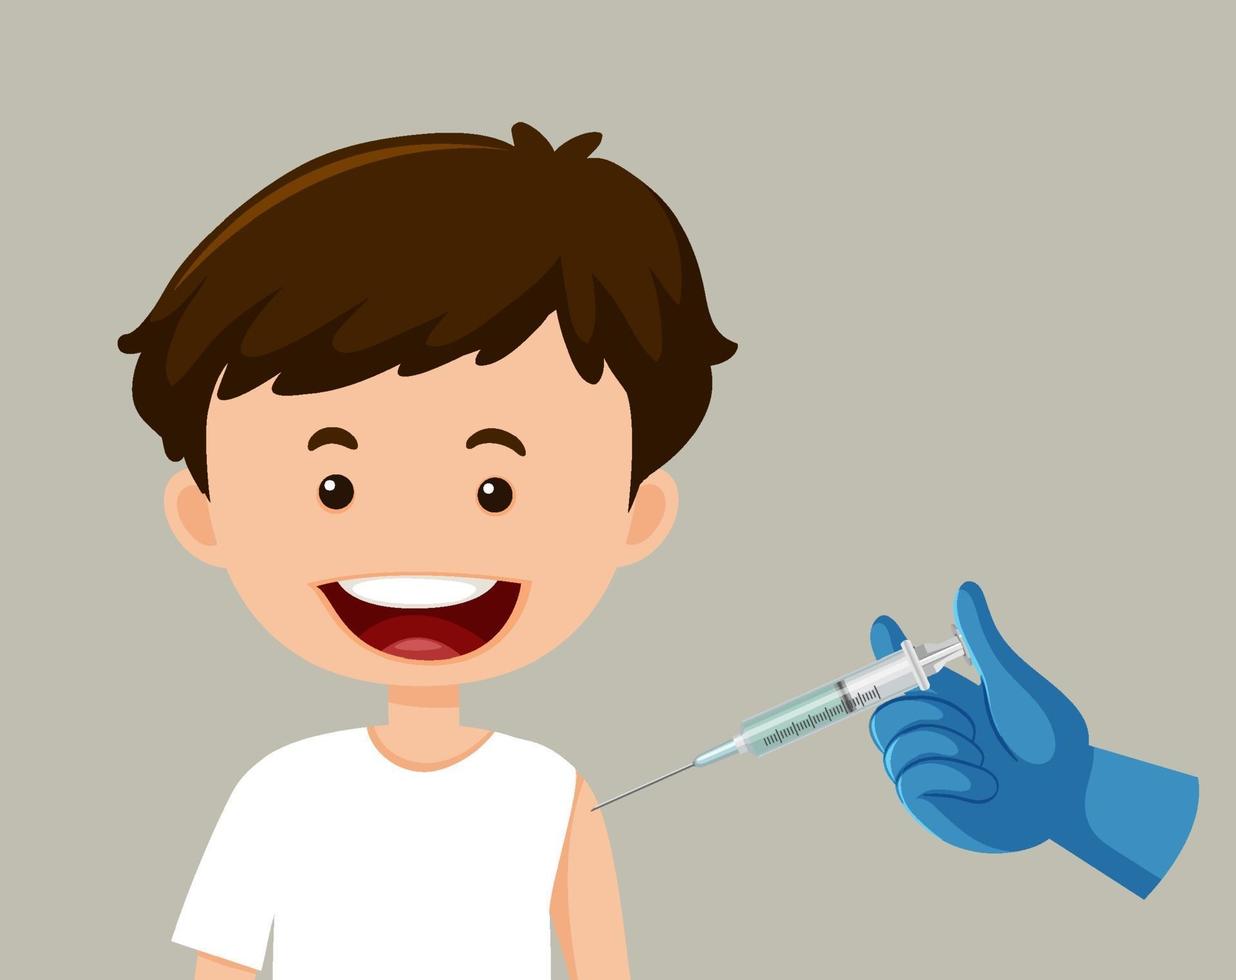 Cartoon character of a boy getting a vaccine vector